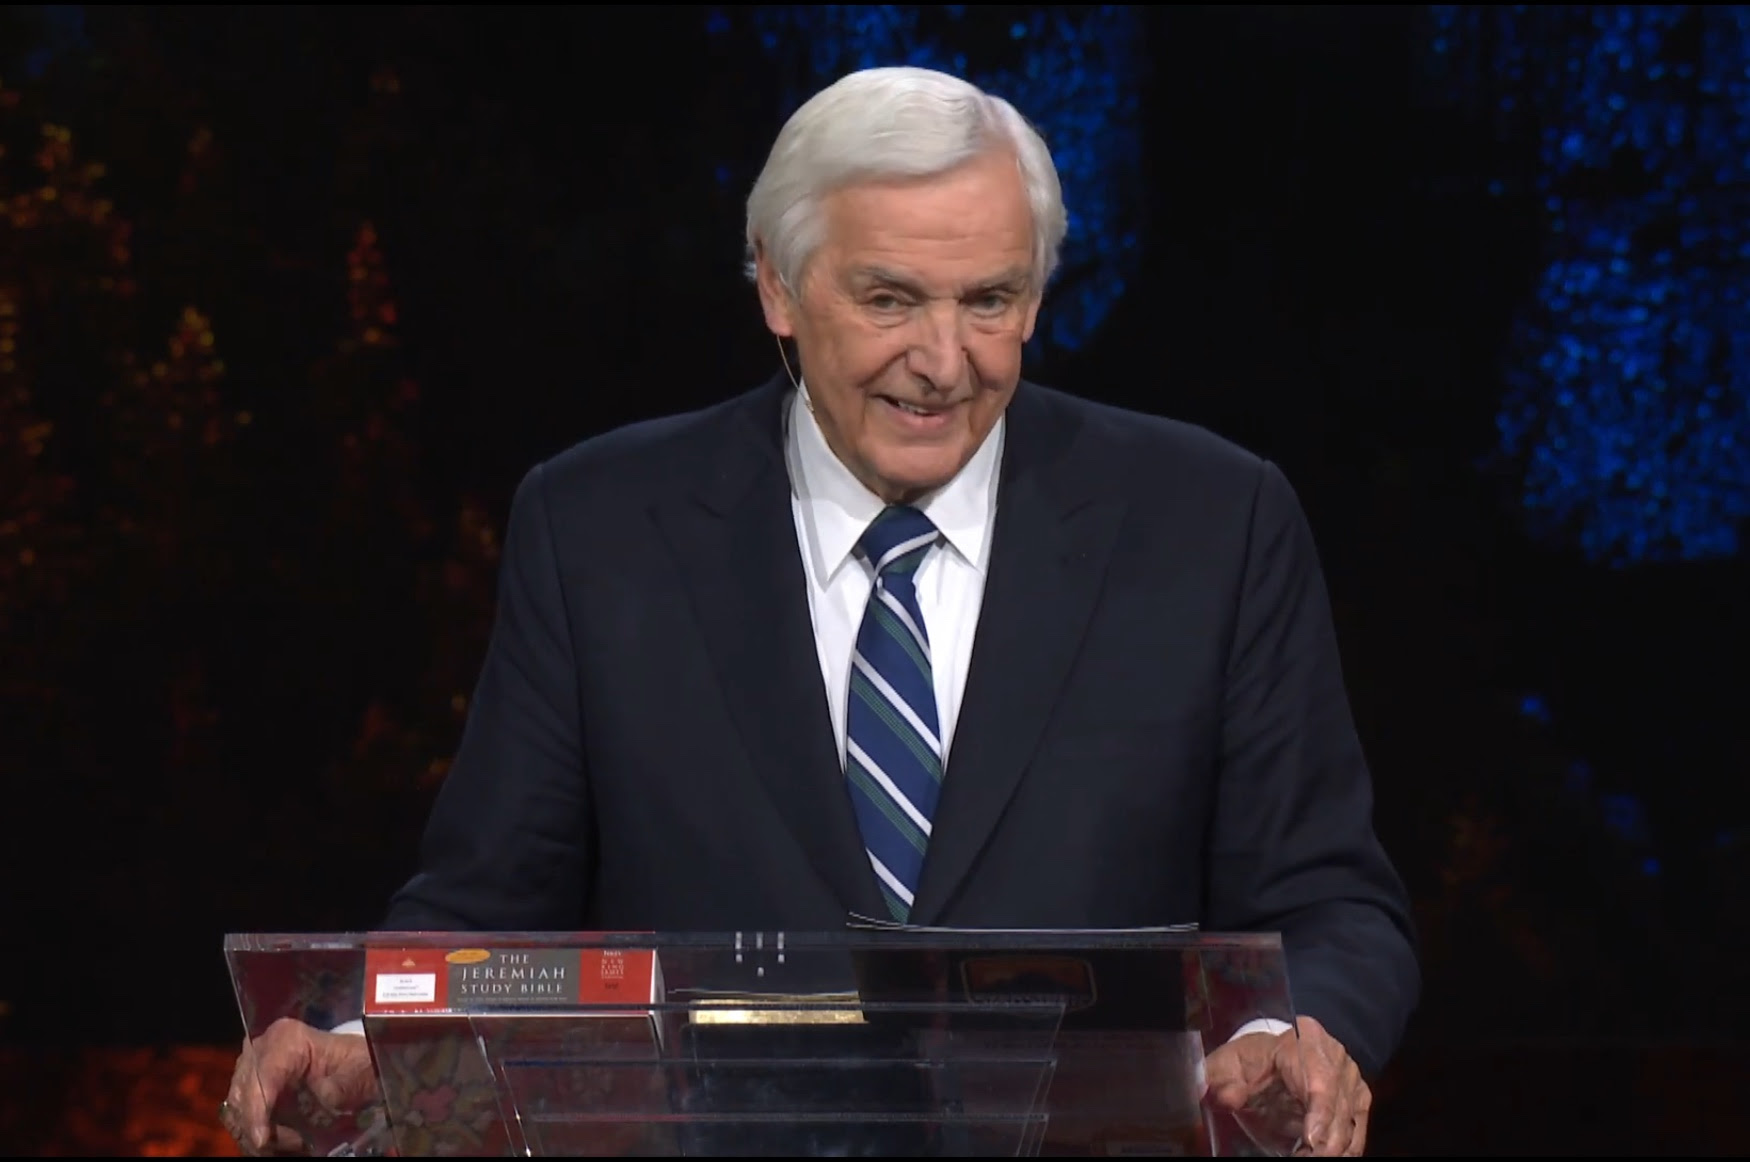 [Release] Dr. David Jeremiah Concludes Book Tour Events with Lessons on